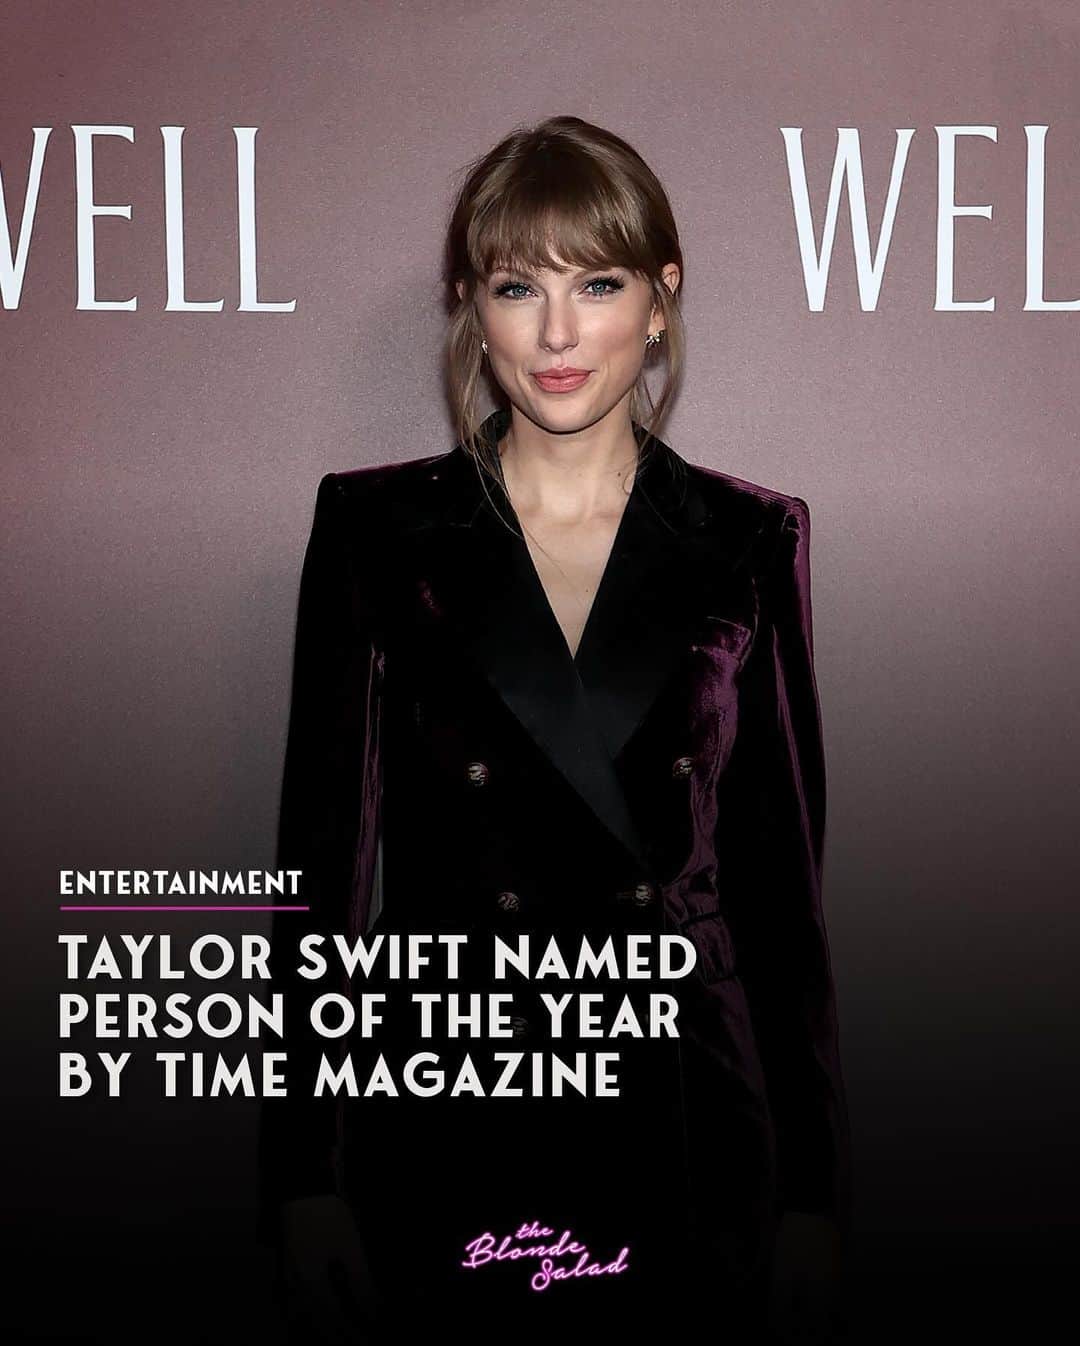 Blonde Saladのインスタグラム：「Taylor Swift sealed a stellar 2023 by being named Time Magazine's person of the year. The singer, whose Eras tour broke box office records, follows the likes of Barack Obama, Greta Thunberg and Volodymyr Zelensky.  Already a superstar before 2023, her career has reached new goals thanks to the Eras tour - where the singer perform 45 song set every night.  Congrats @taylorswift 💖  #TaylorSwift #TimeMagazine #PersonoftheYear #TheBlondeSalad」